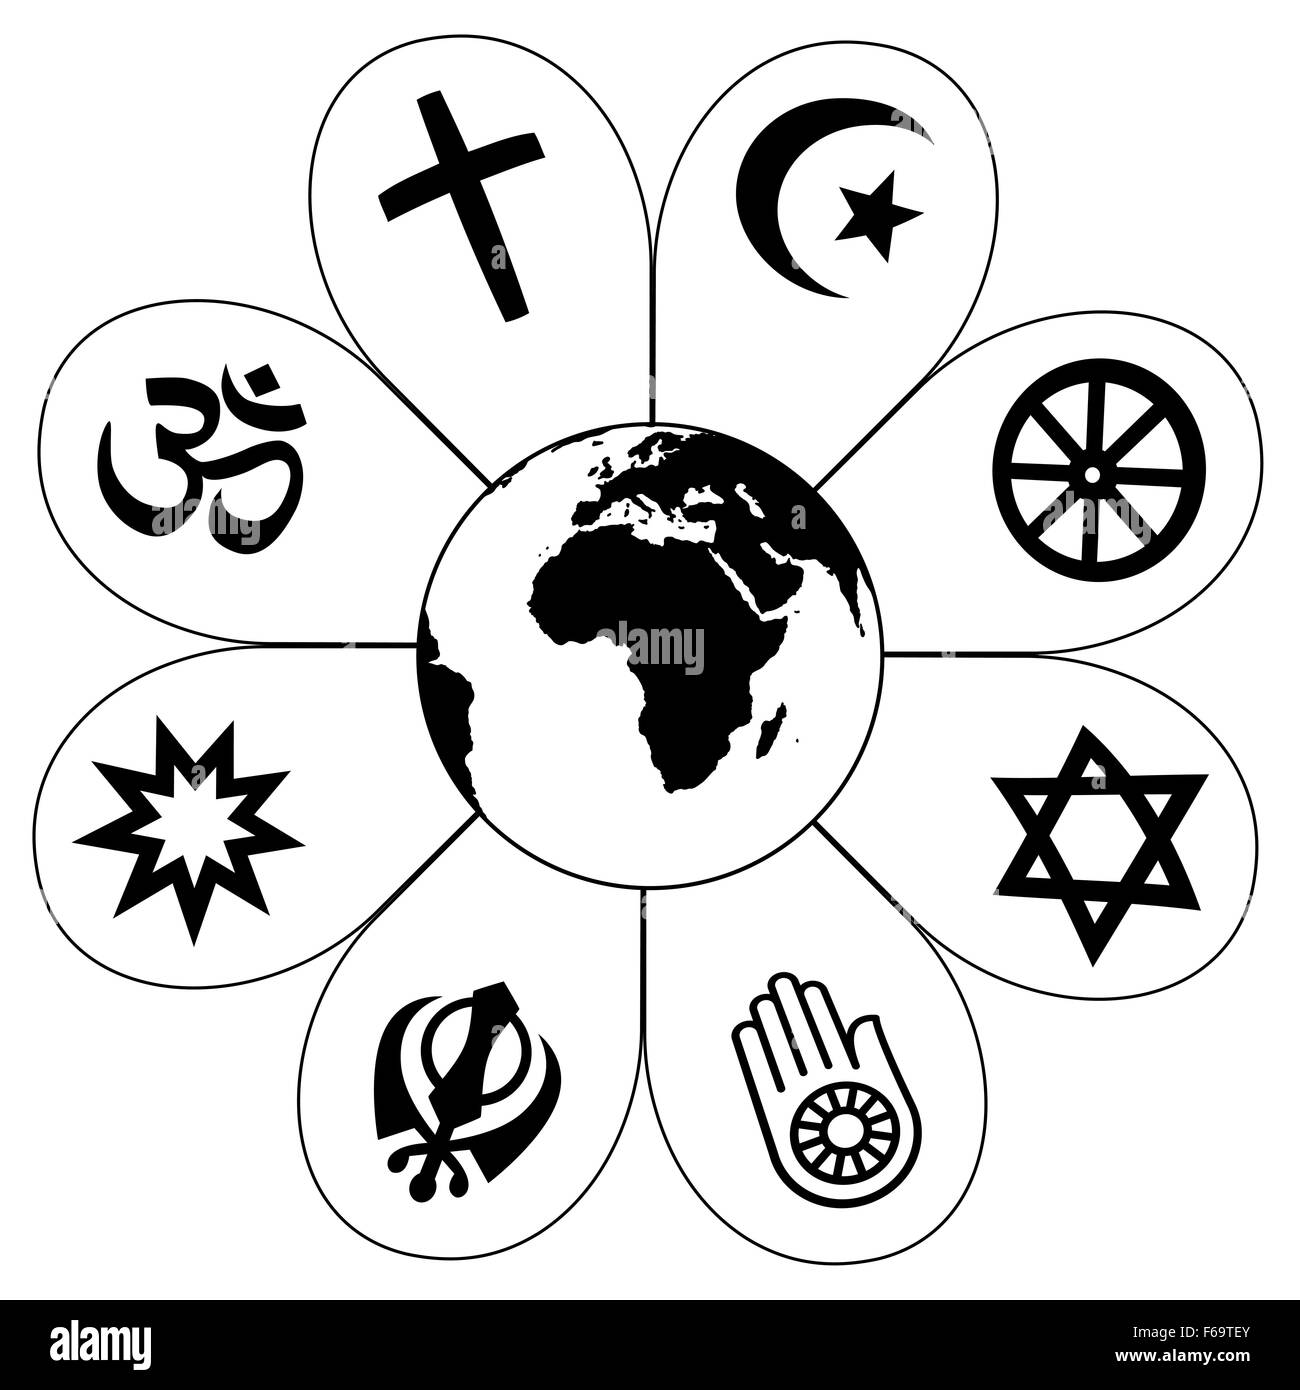 World religions - flower icon made of religious symbols and planet earth in center. Illustration on white background. Stock Photo